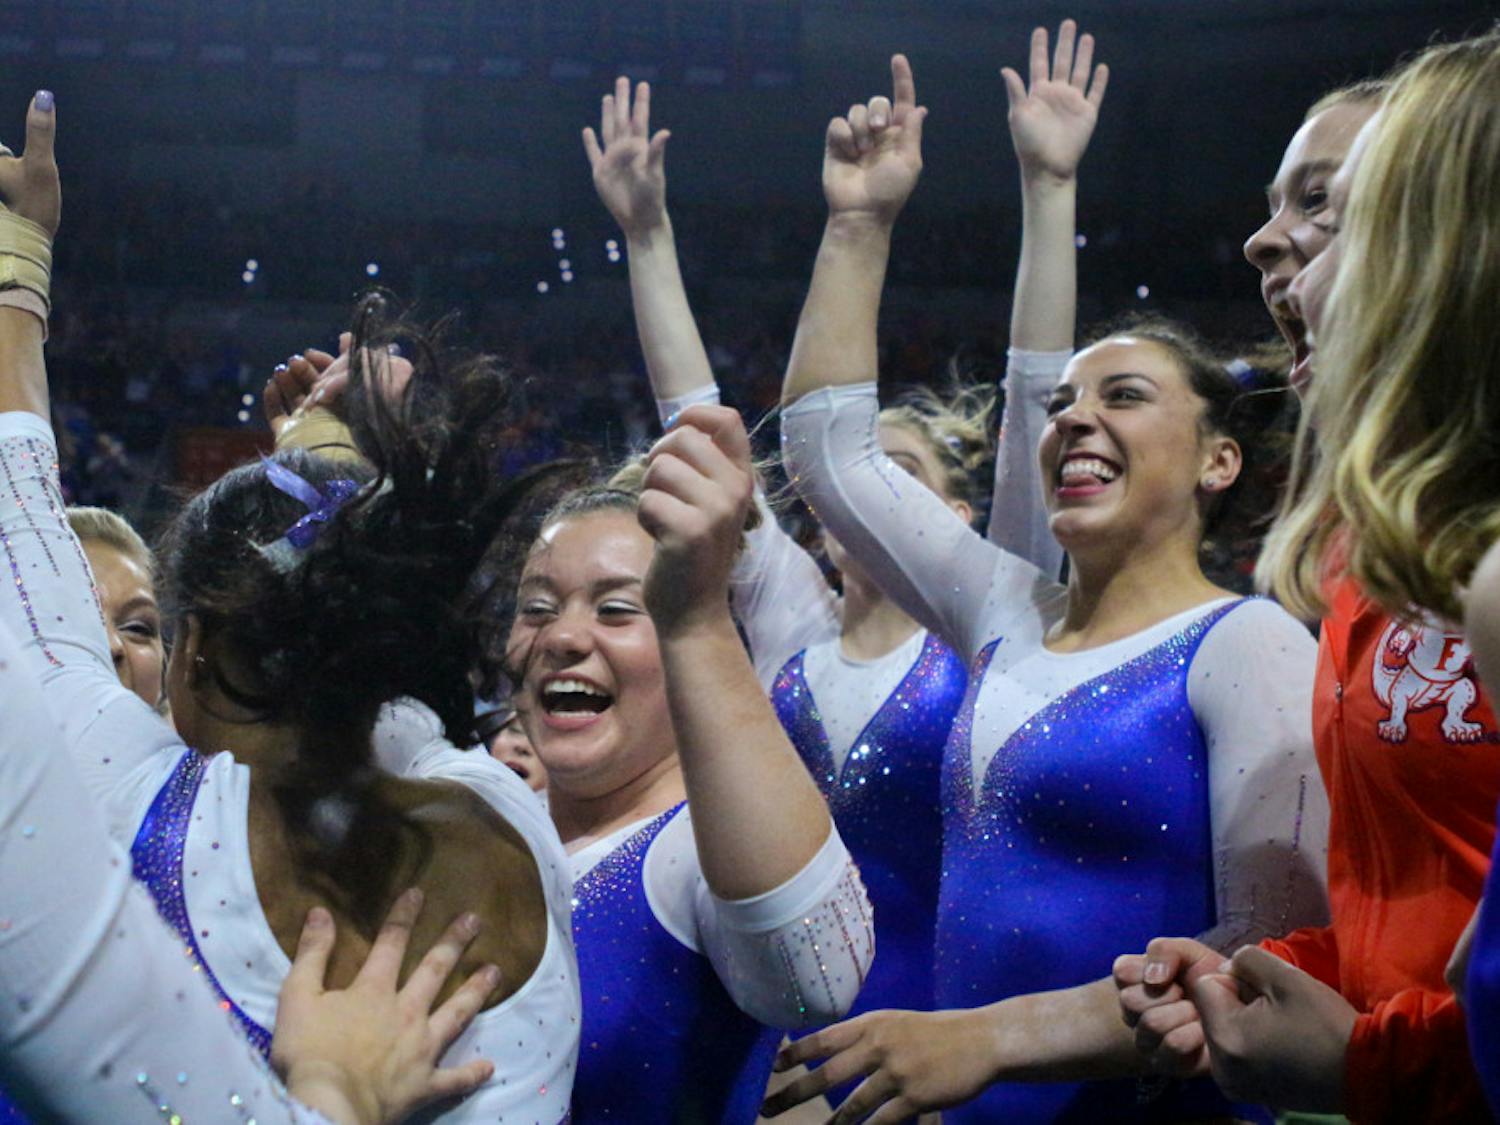 Florida's gymnastics team finished second at the NCAA Championships on Friday night in St. Louis, securing a spot in Saturday's Super Six team final.